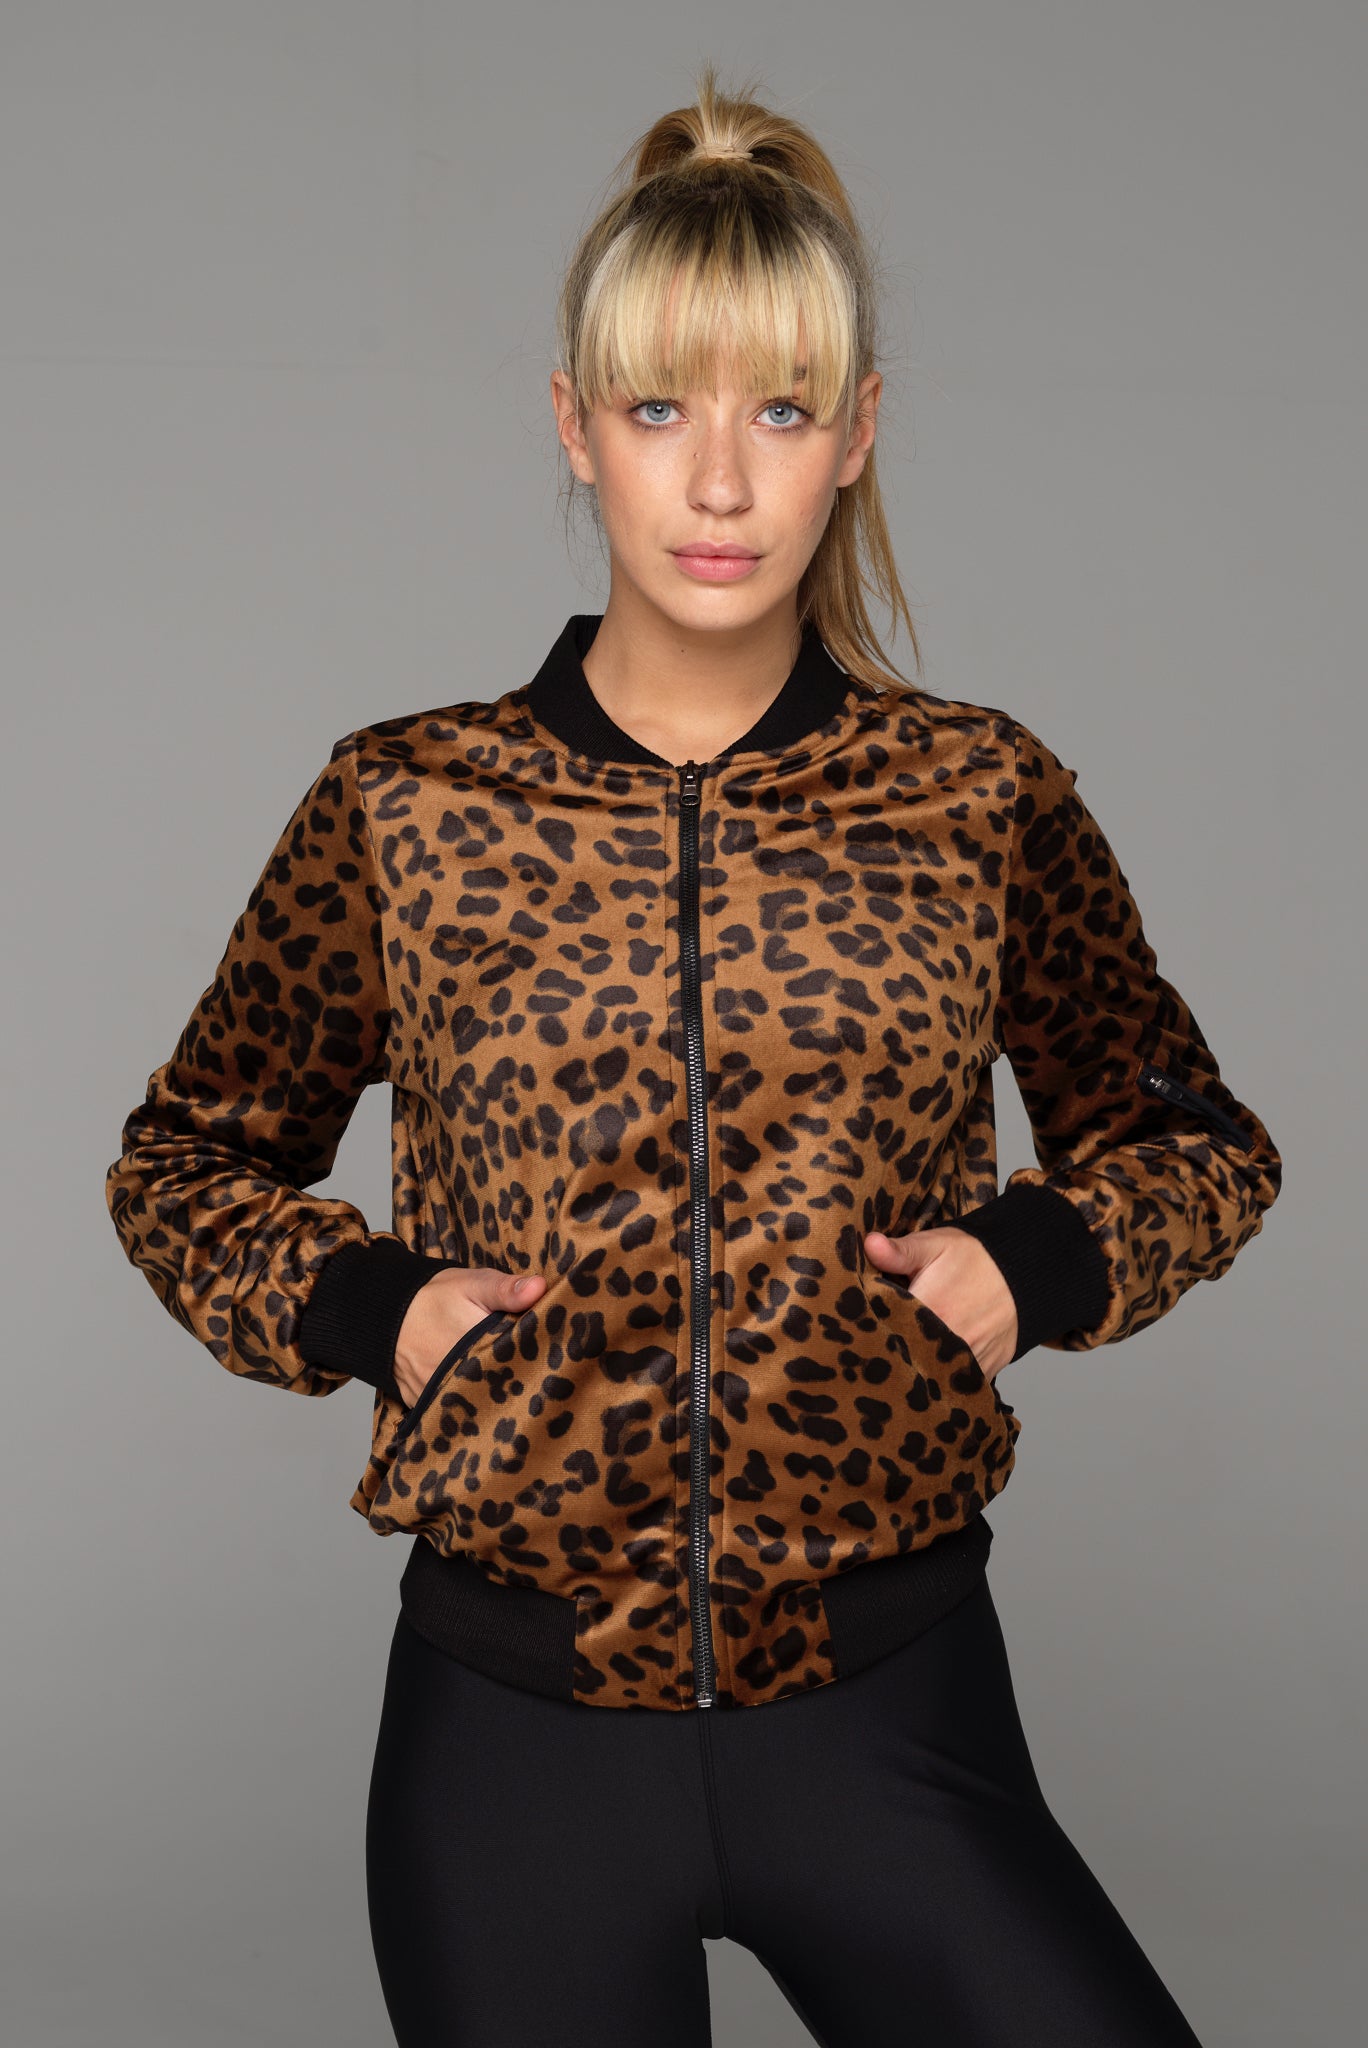 Warm and toasty for winter, our Roam Bomber Jacket in Bronzed Baby print looks great and feels comfy on.